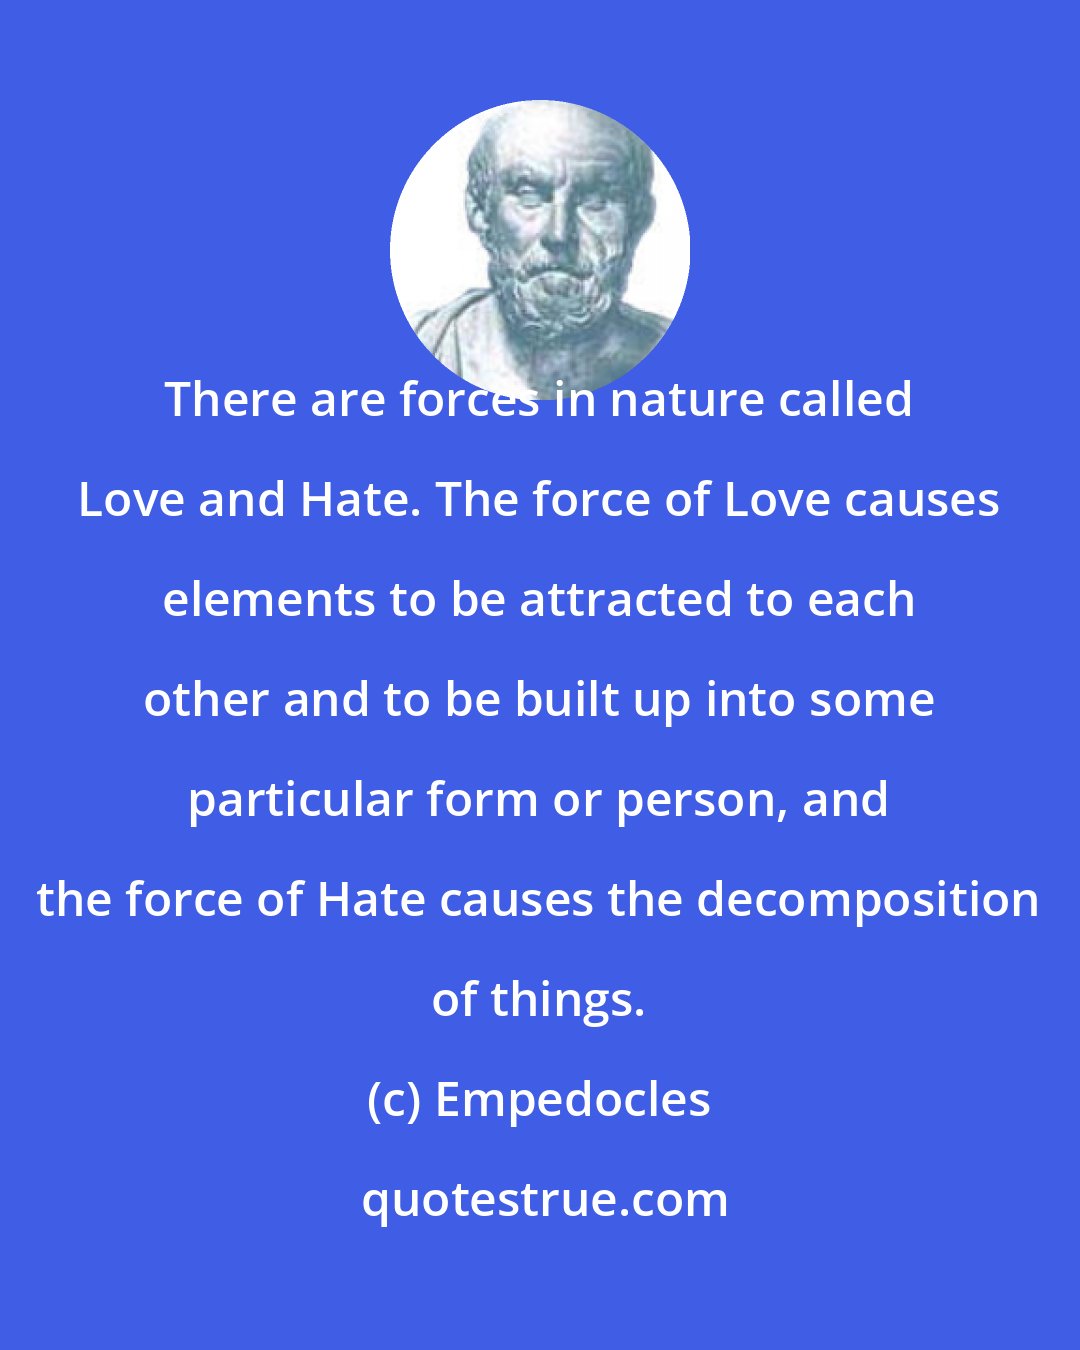 Empedocles: There are forces in nature called Love and Hate. The force of Love causes elements to be attracted to each other and to be built up into some particular form or person, and the force of Hate causes the decomposition of things.